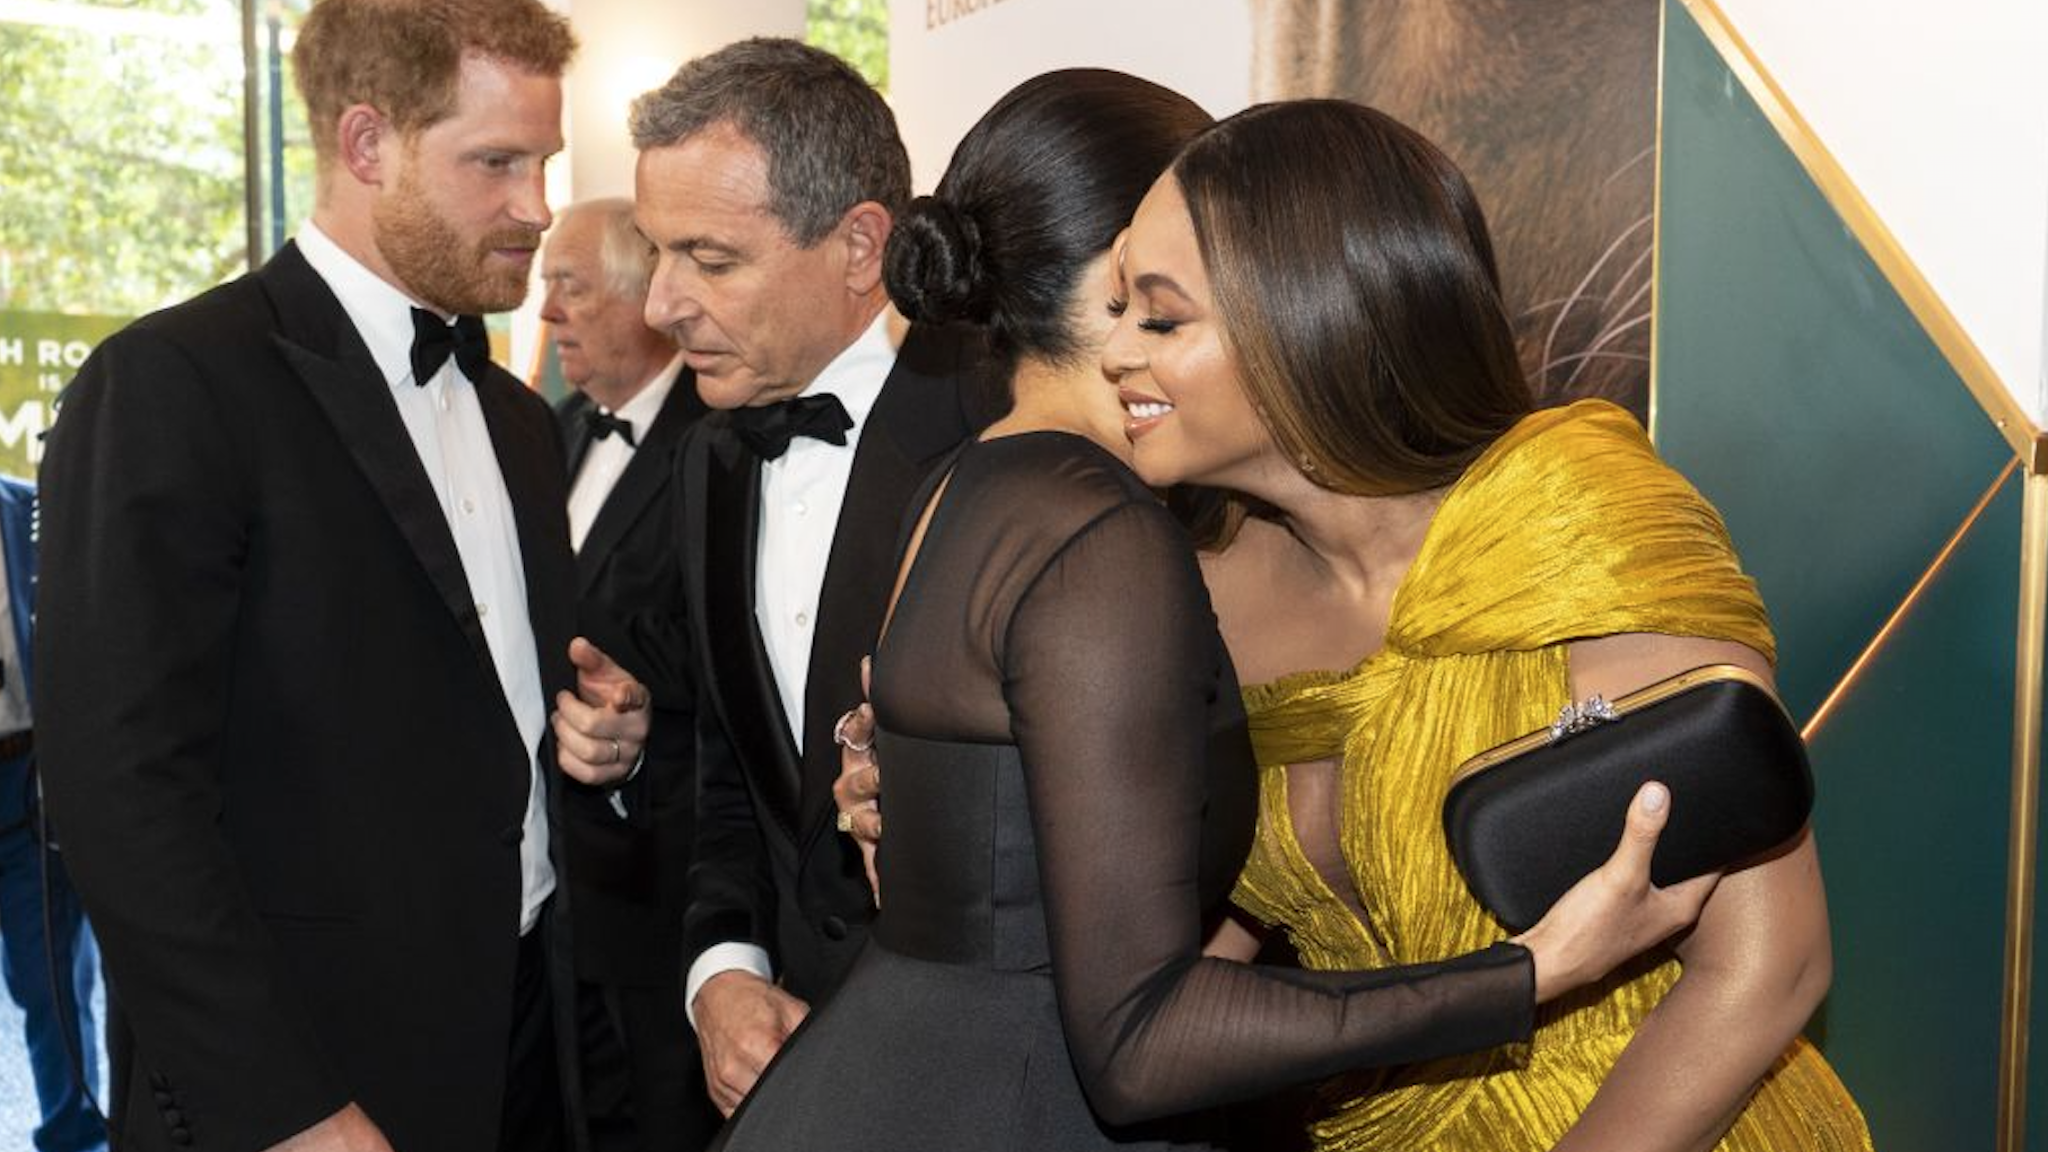 Britain's Prince Harry, Duke of Sussex (L) chats with Disney CEO Robert Iger as Britain's Meghan, Duchess of Sussex (2nd R) embraces US singer-songwriter Beyoncé (R) as they attend the European premiere of the film The Lion King in London on July 14, 2019.